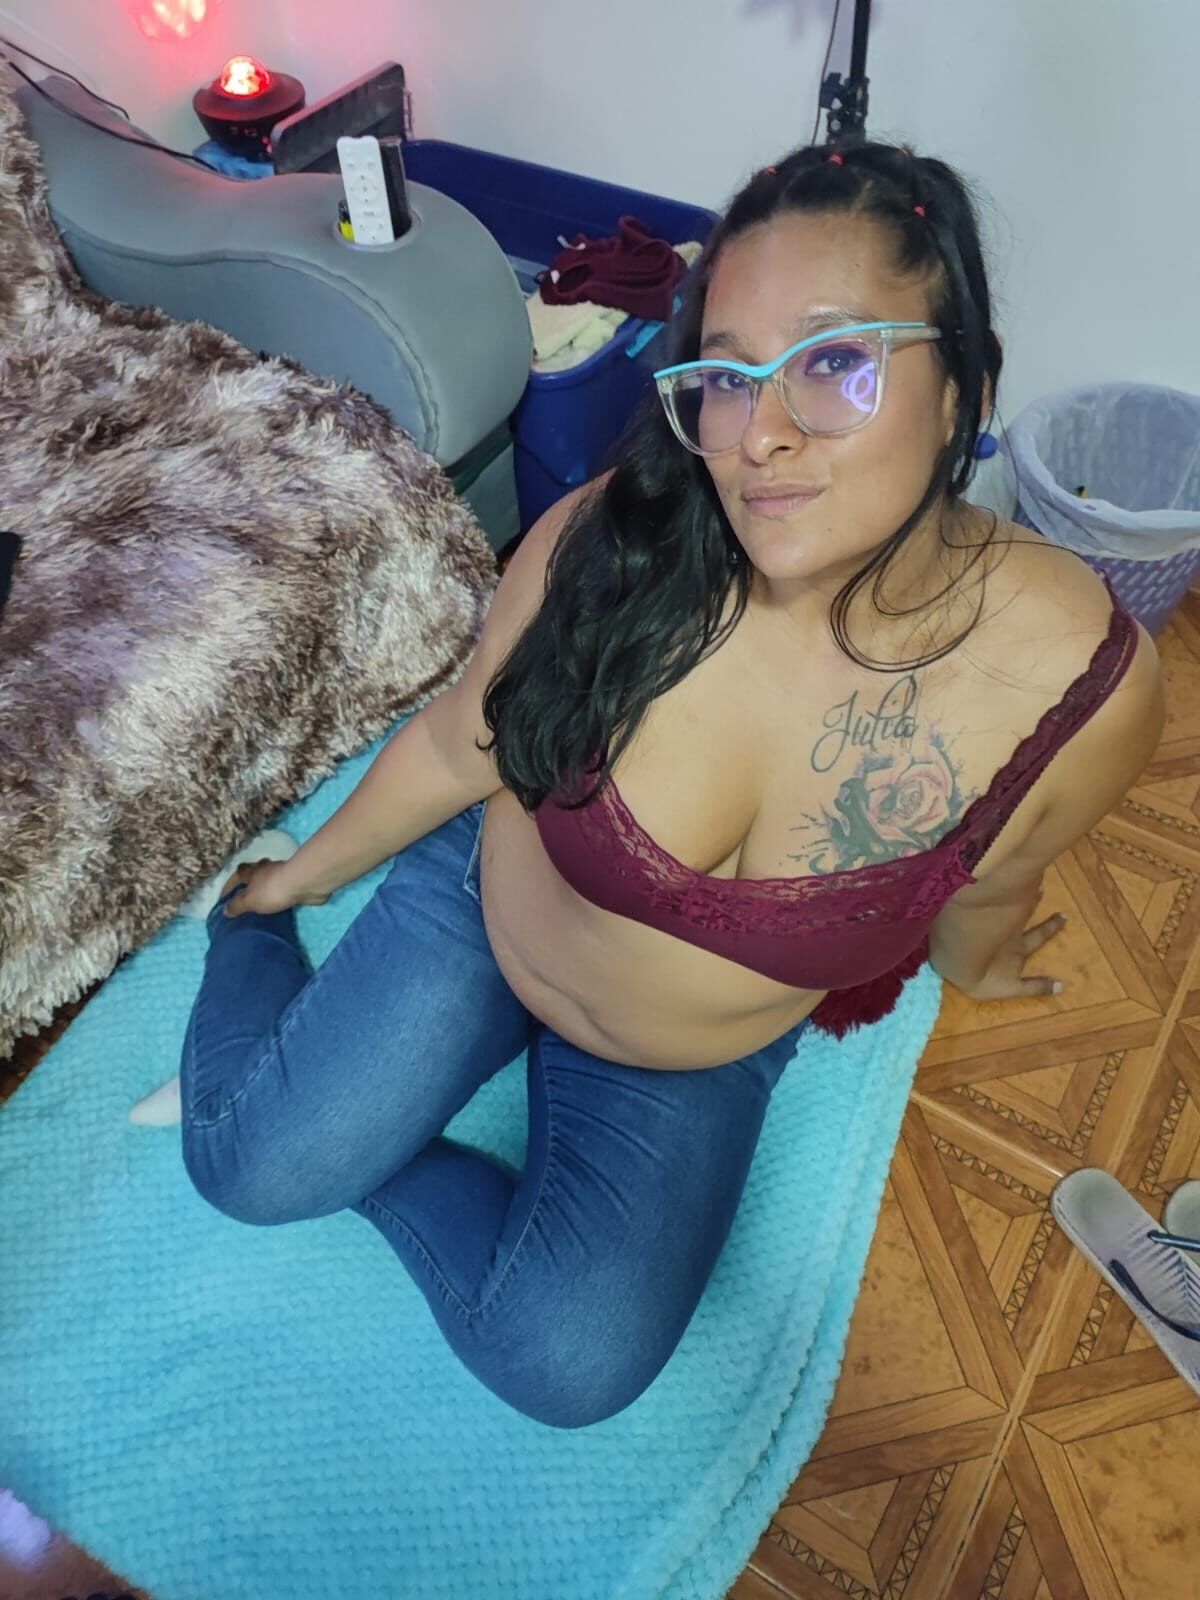 search on live camera and we have fun together ReedxRosee